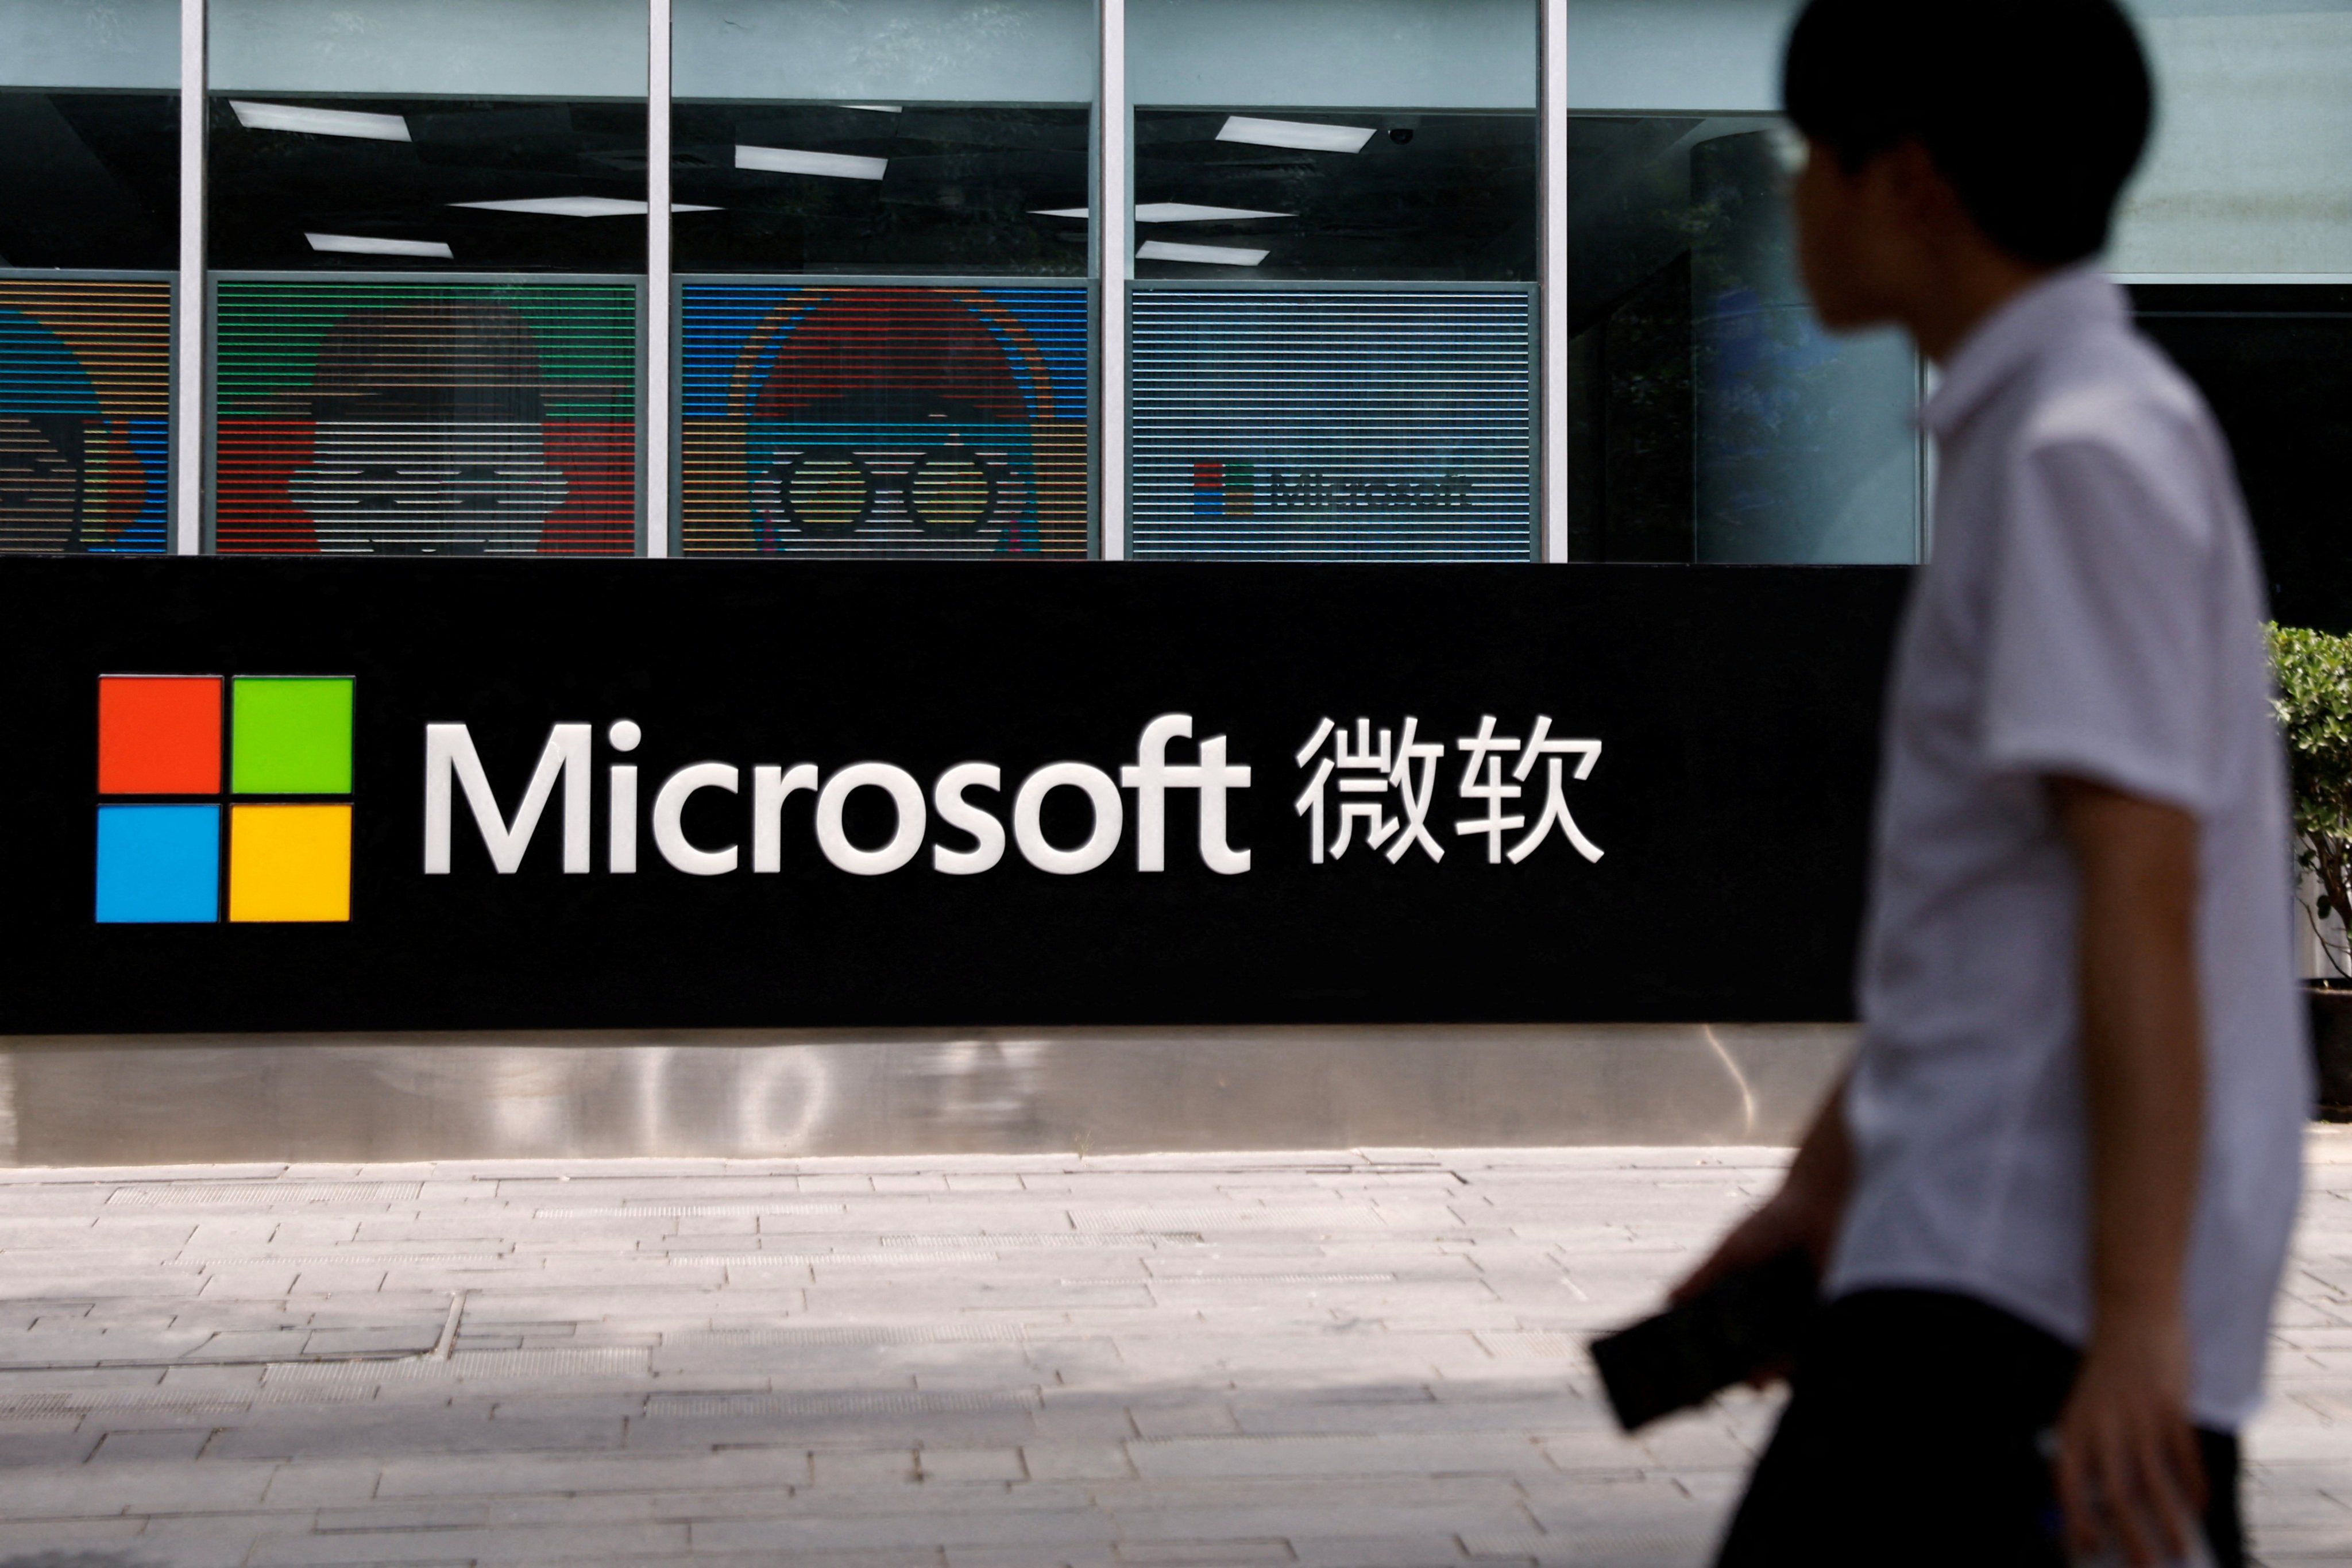 A Microsoft office building in Beijing. Photo: Reuters